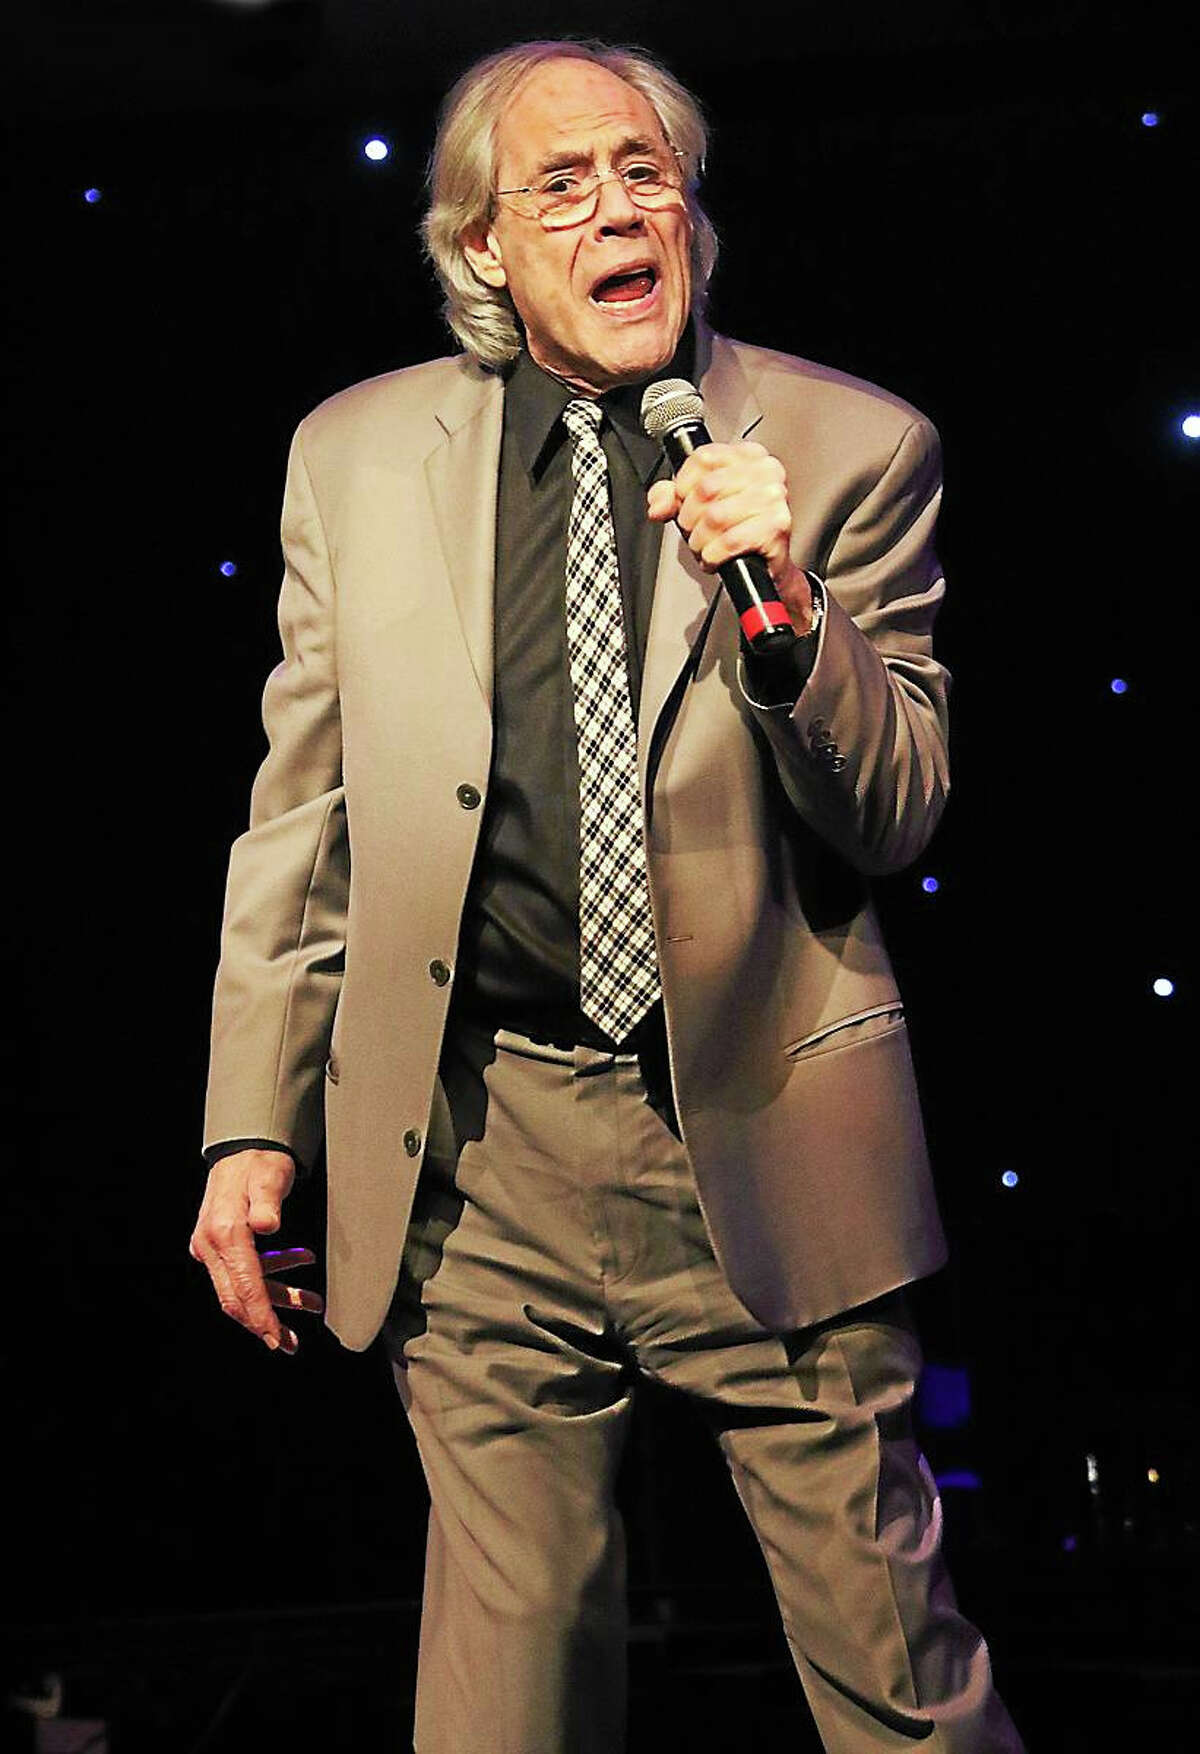 Photo by John AtashianComedian,singer and actor Robert Klein is shown performing on stage during his show at Infinity Music Hall in Hartford on Sunday Nov. 8. To view the long list of upcoming entertainment coming to Infinity Music Hall in Hartford and Norfolk, go to www.infinityhall.com